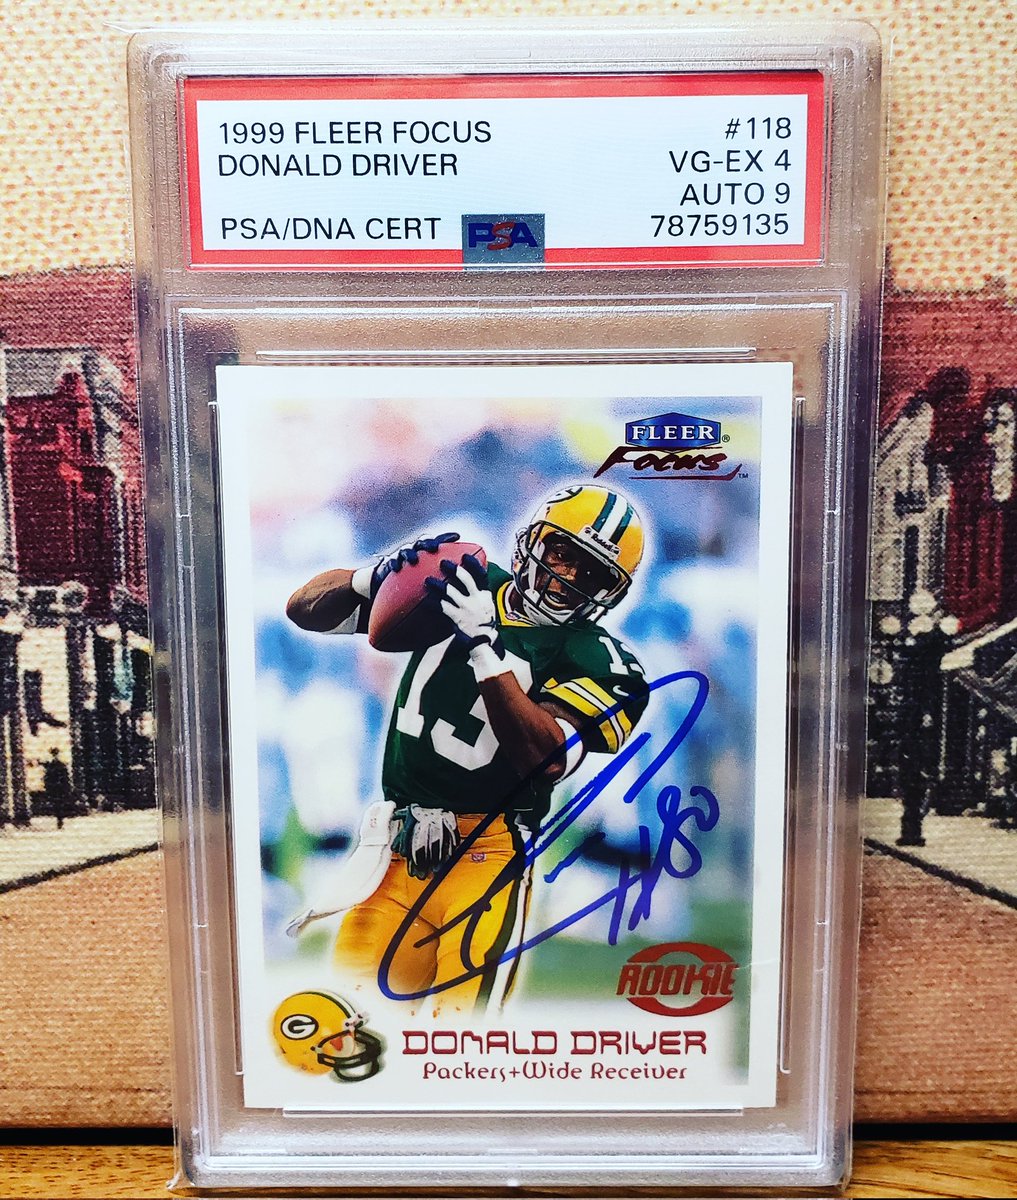 Another recent PC addition - I now have a great autographed example of Donald Driver's RC! No clue how the auto is only graded a 9....the autographed Team HOF RC set is slowly coming together! #donalddriver #autograph #psadna #psacard #thehobby #greenbaypackers #footballcards